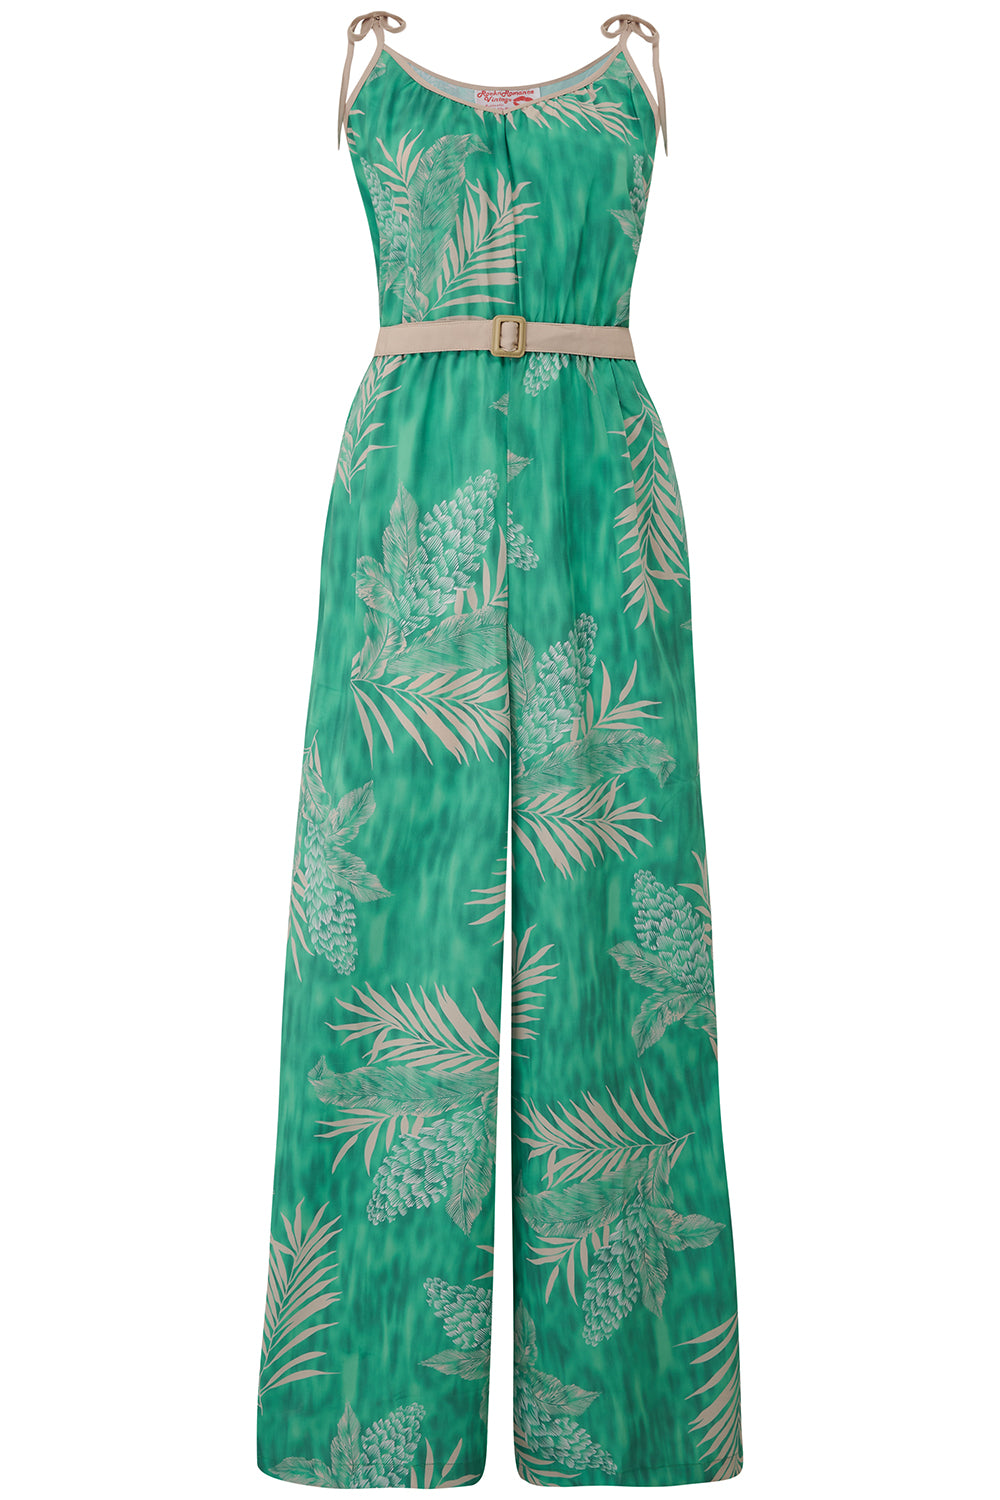 **Sample Sale** The "Marcie" Jump Suit in Emerald Palm Print, True & Authentic 1950s Vintage Style